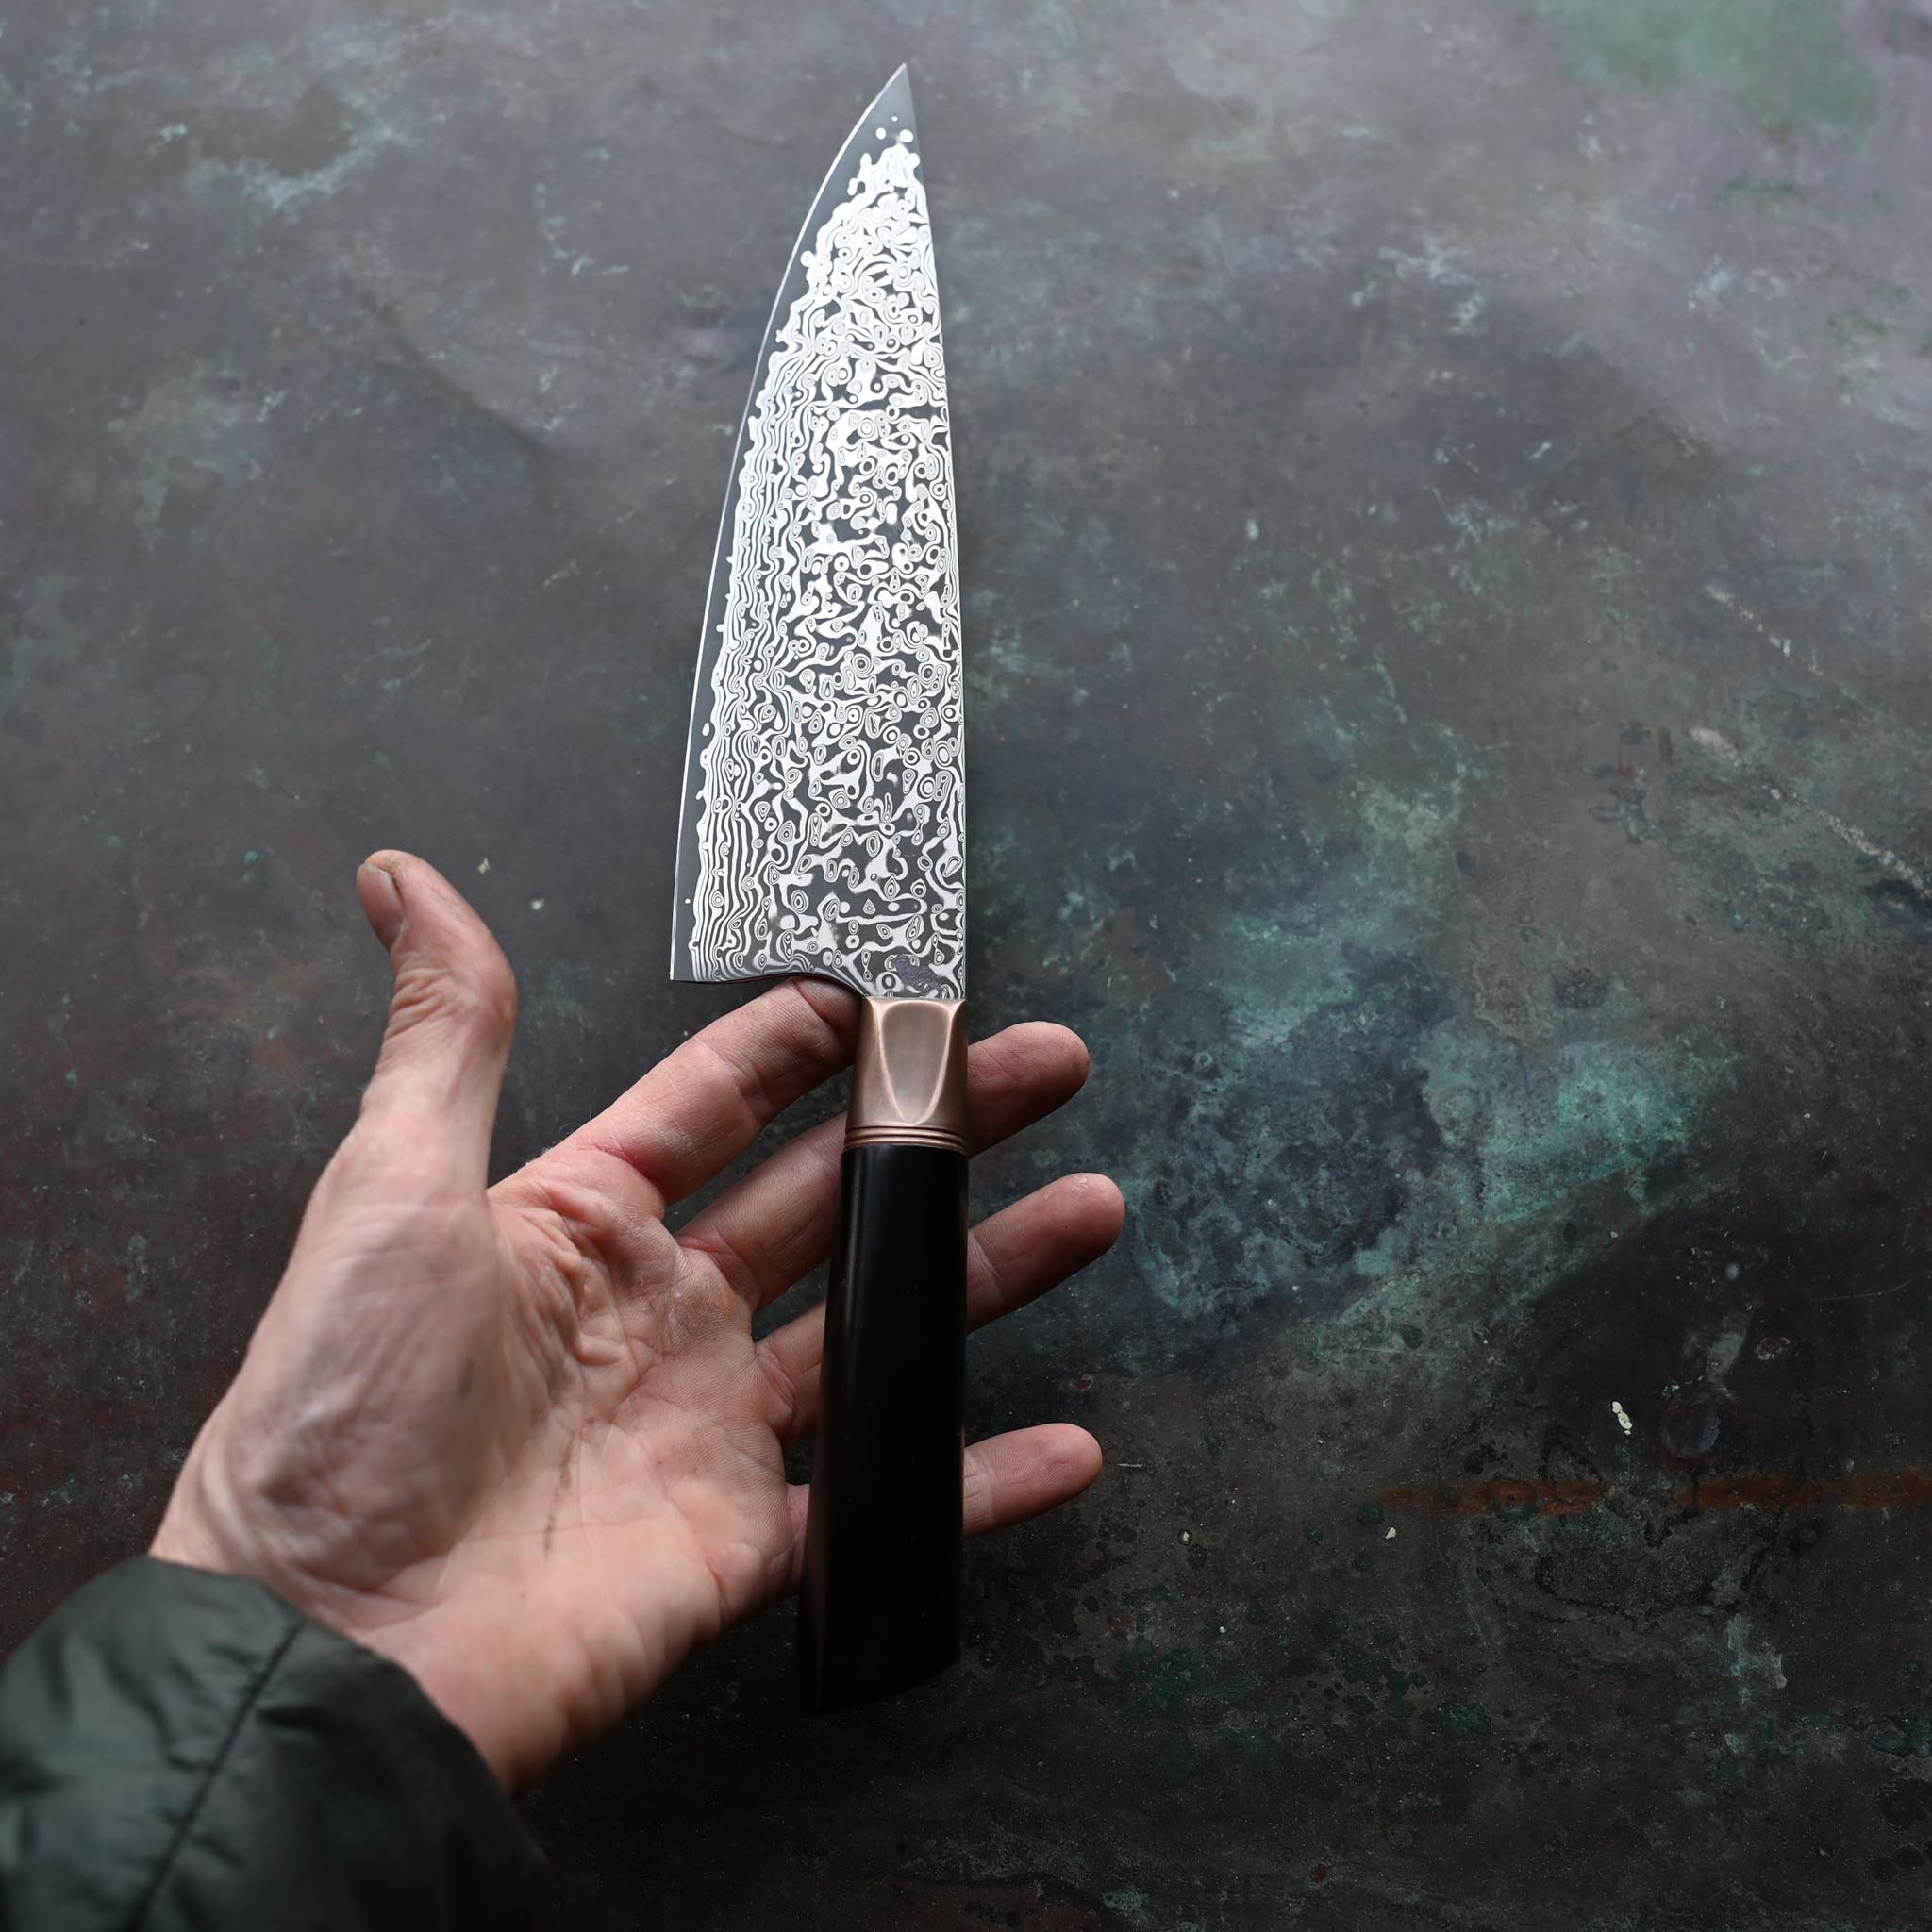 Damascus Steel Chef Knife with Antique Bolster and Black Handle on Concrete Background